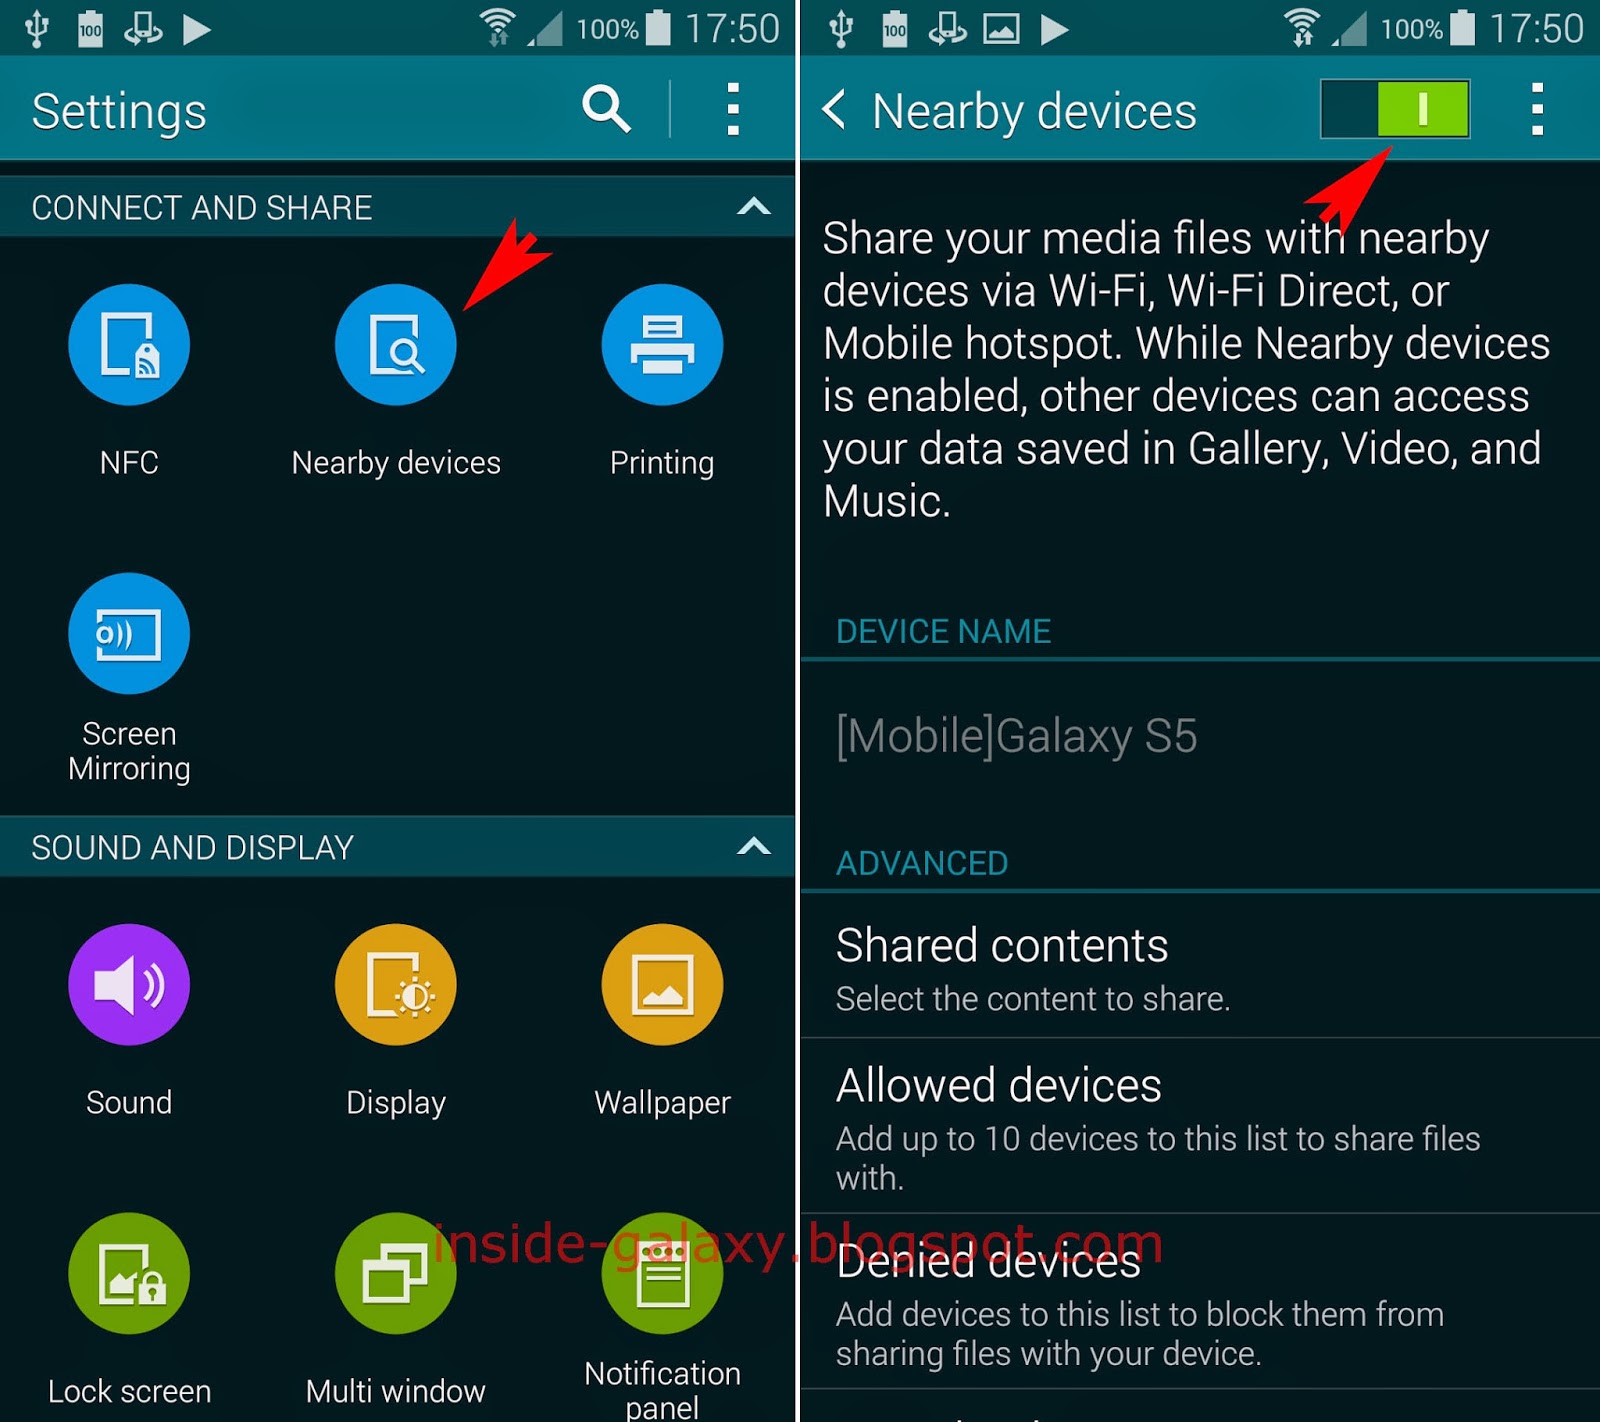 Inside Galaxy Samsung Galaxy S5 How To Watch Or Download Shared